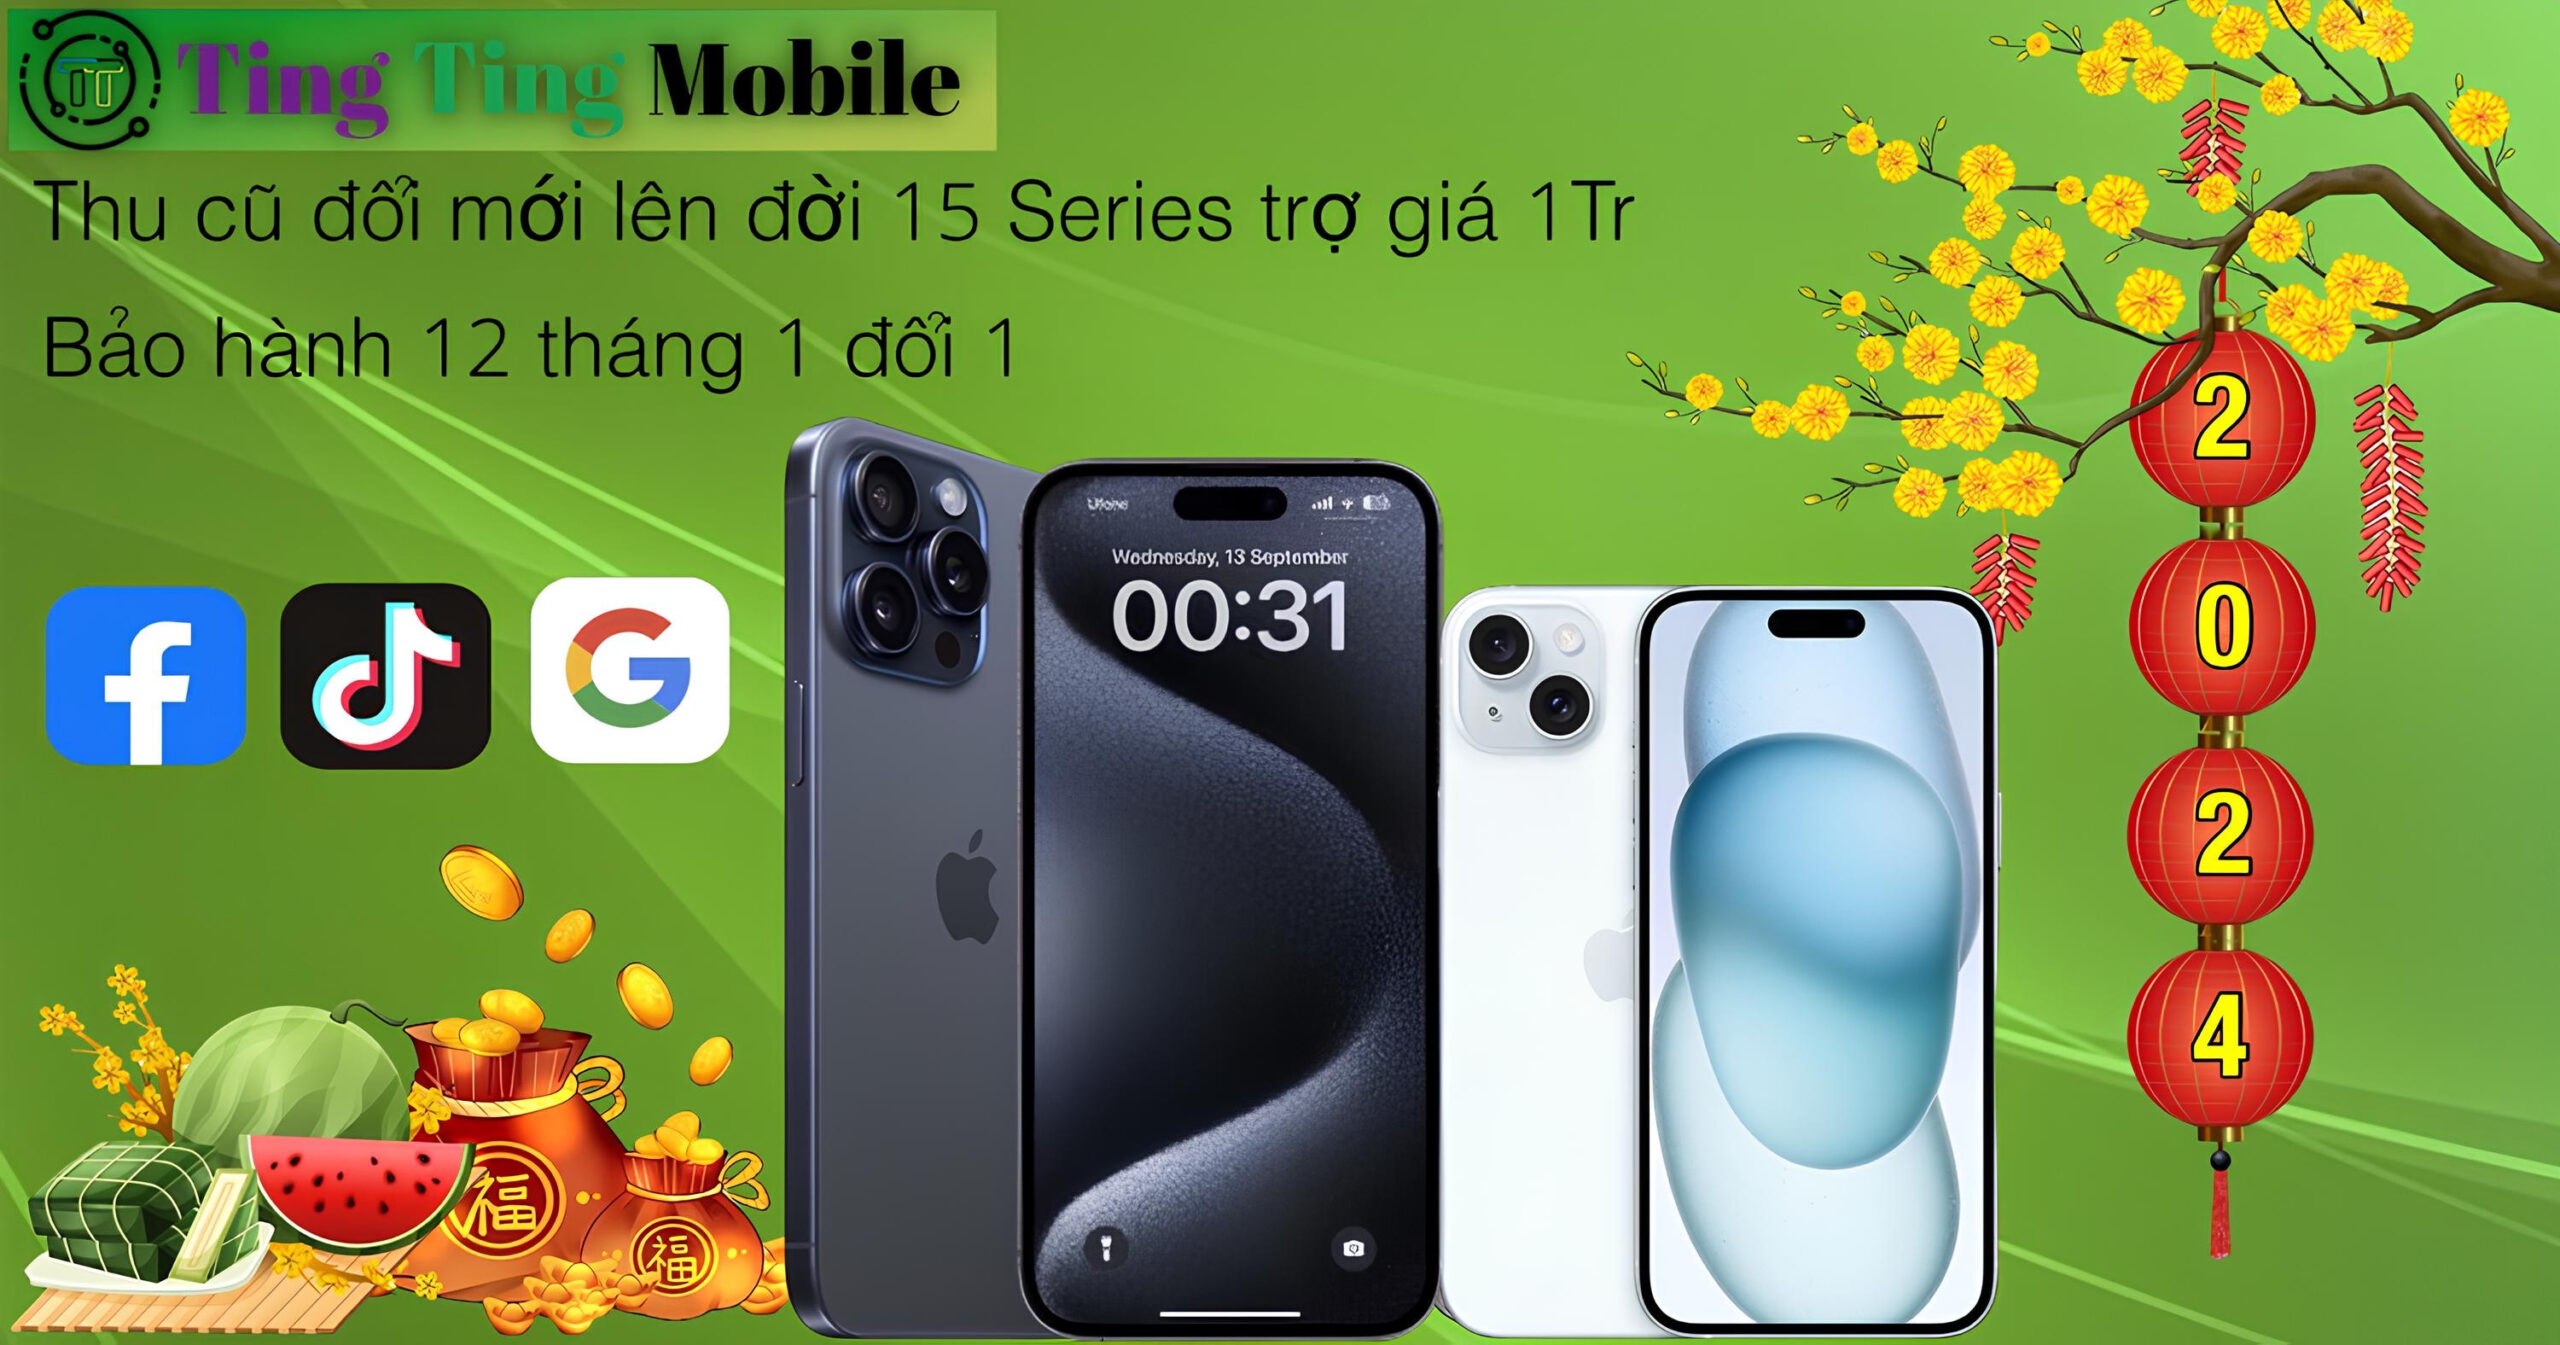 Ting Ting Mobile scaled